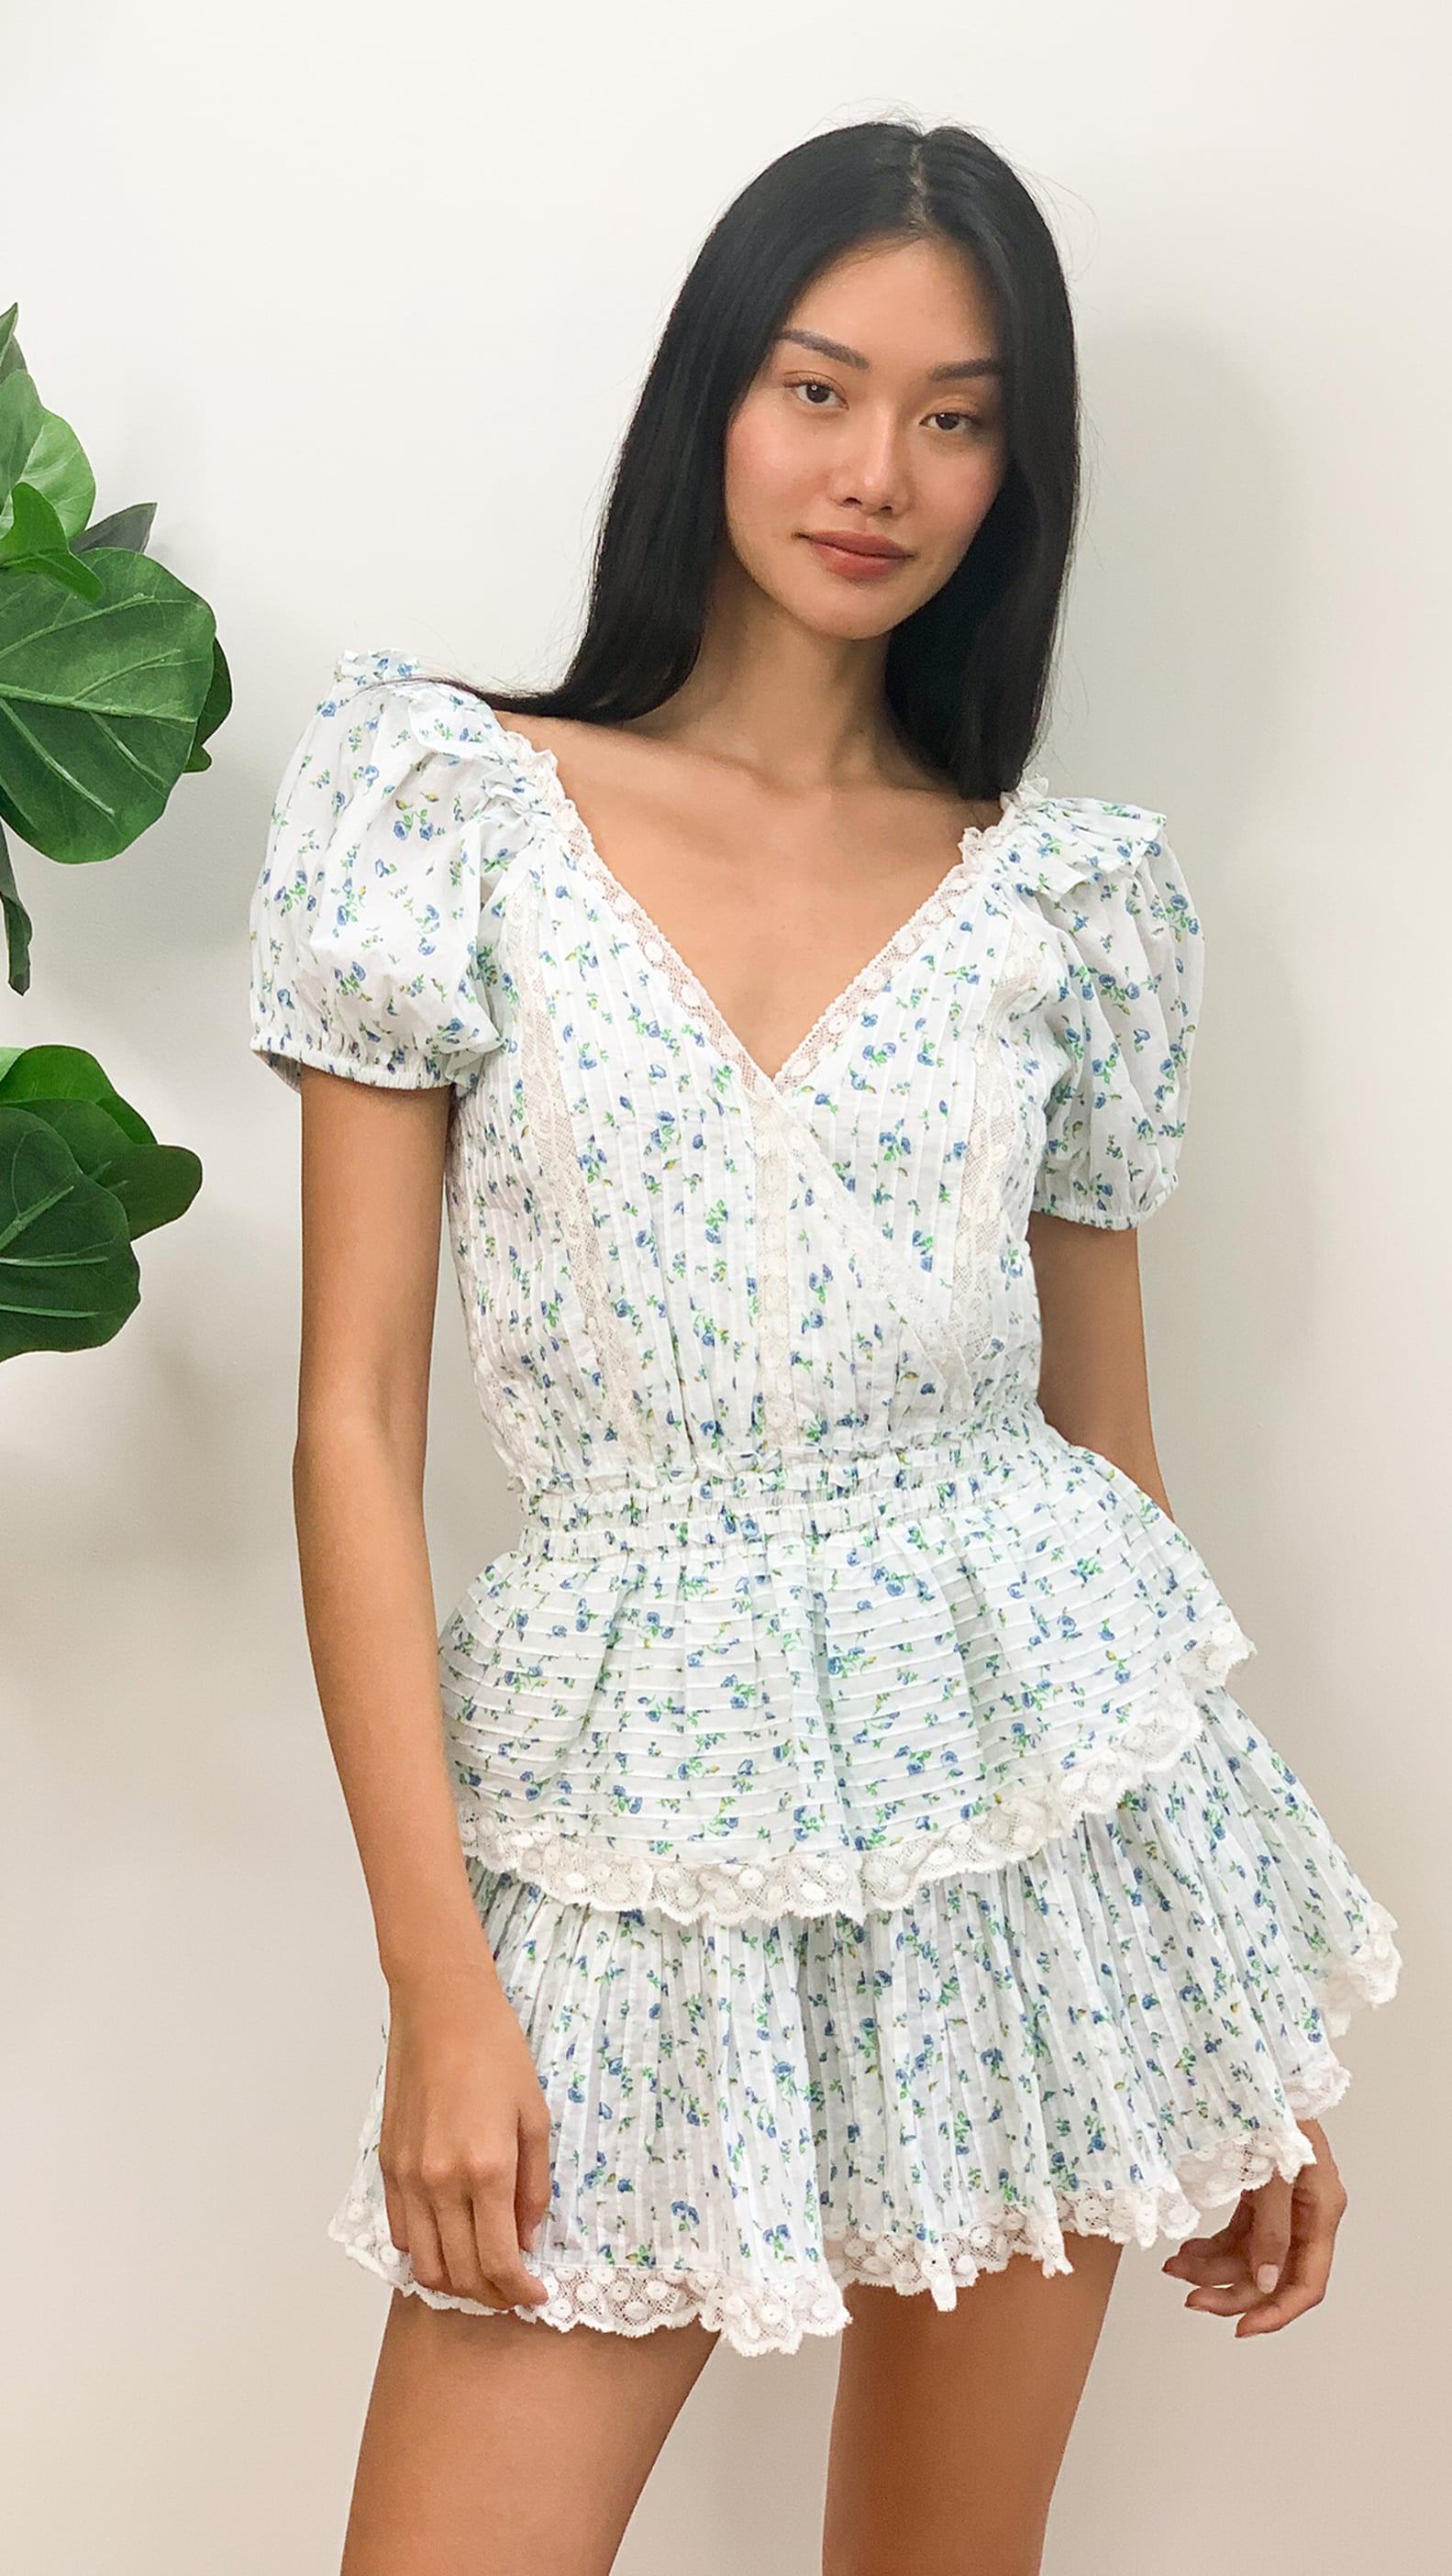 The Best New Arrivals From Shopbop in August 2020 | POPSUGAR Fashion